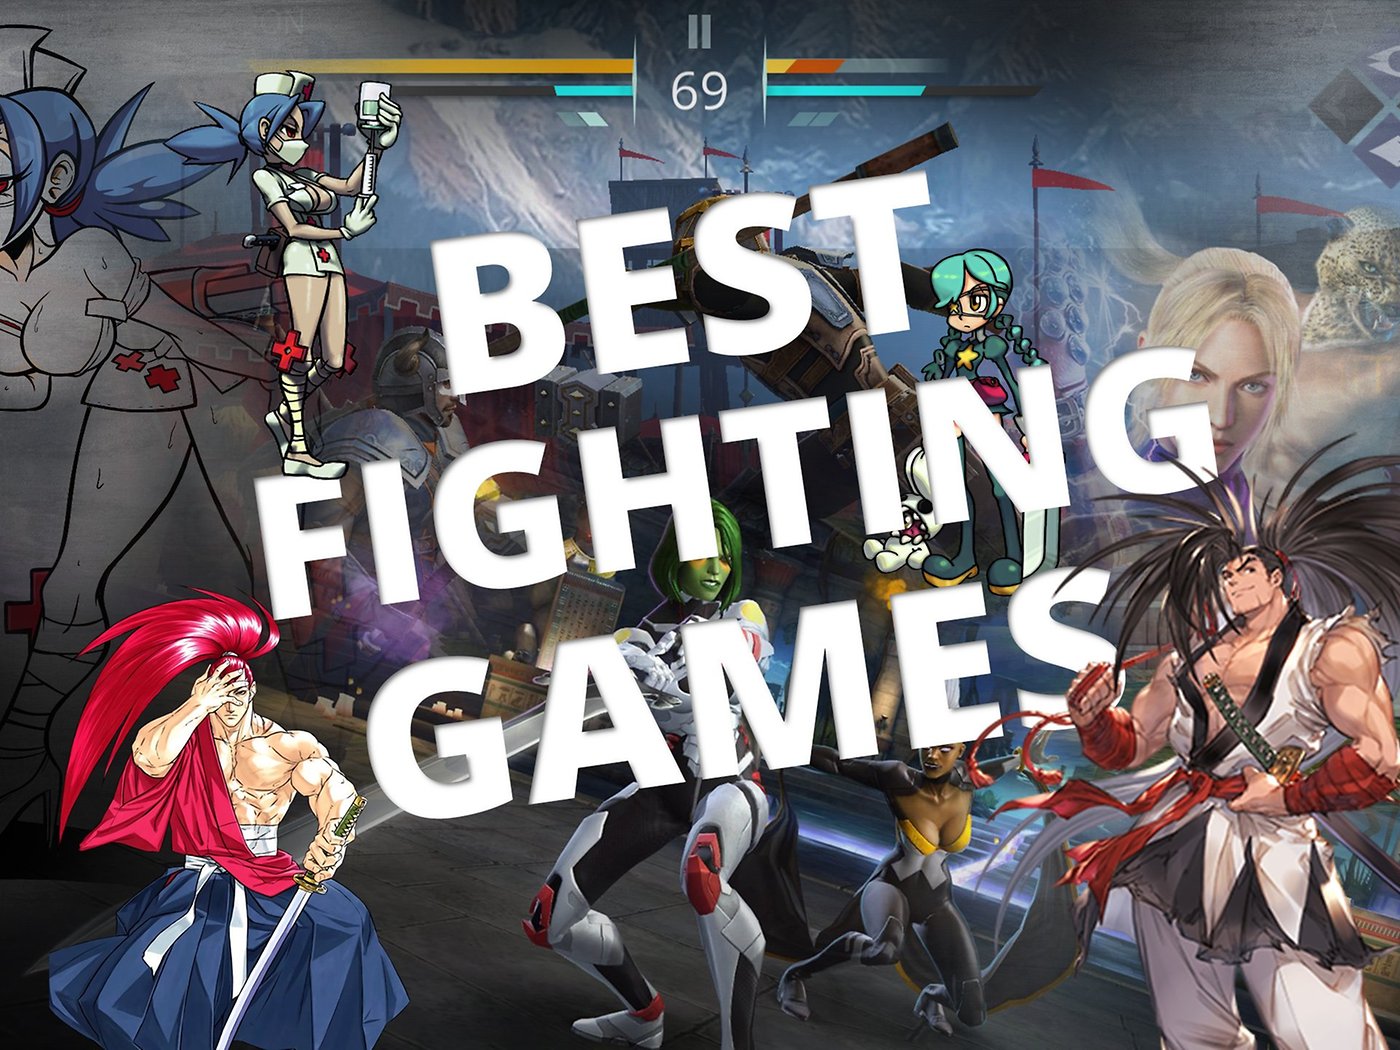 Warriors Arena - Anime Fighting Online! APK for Android Download